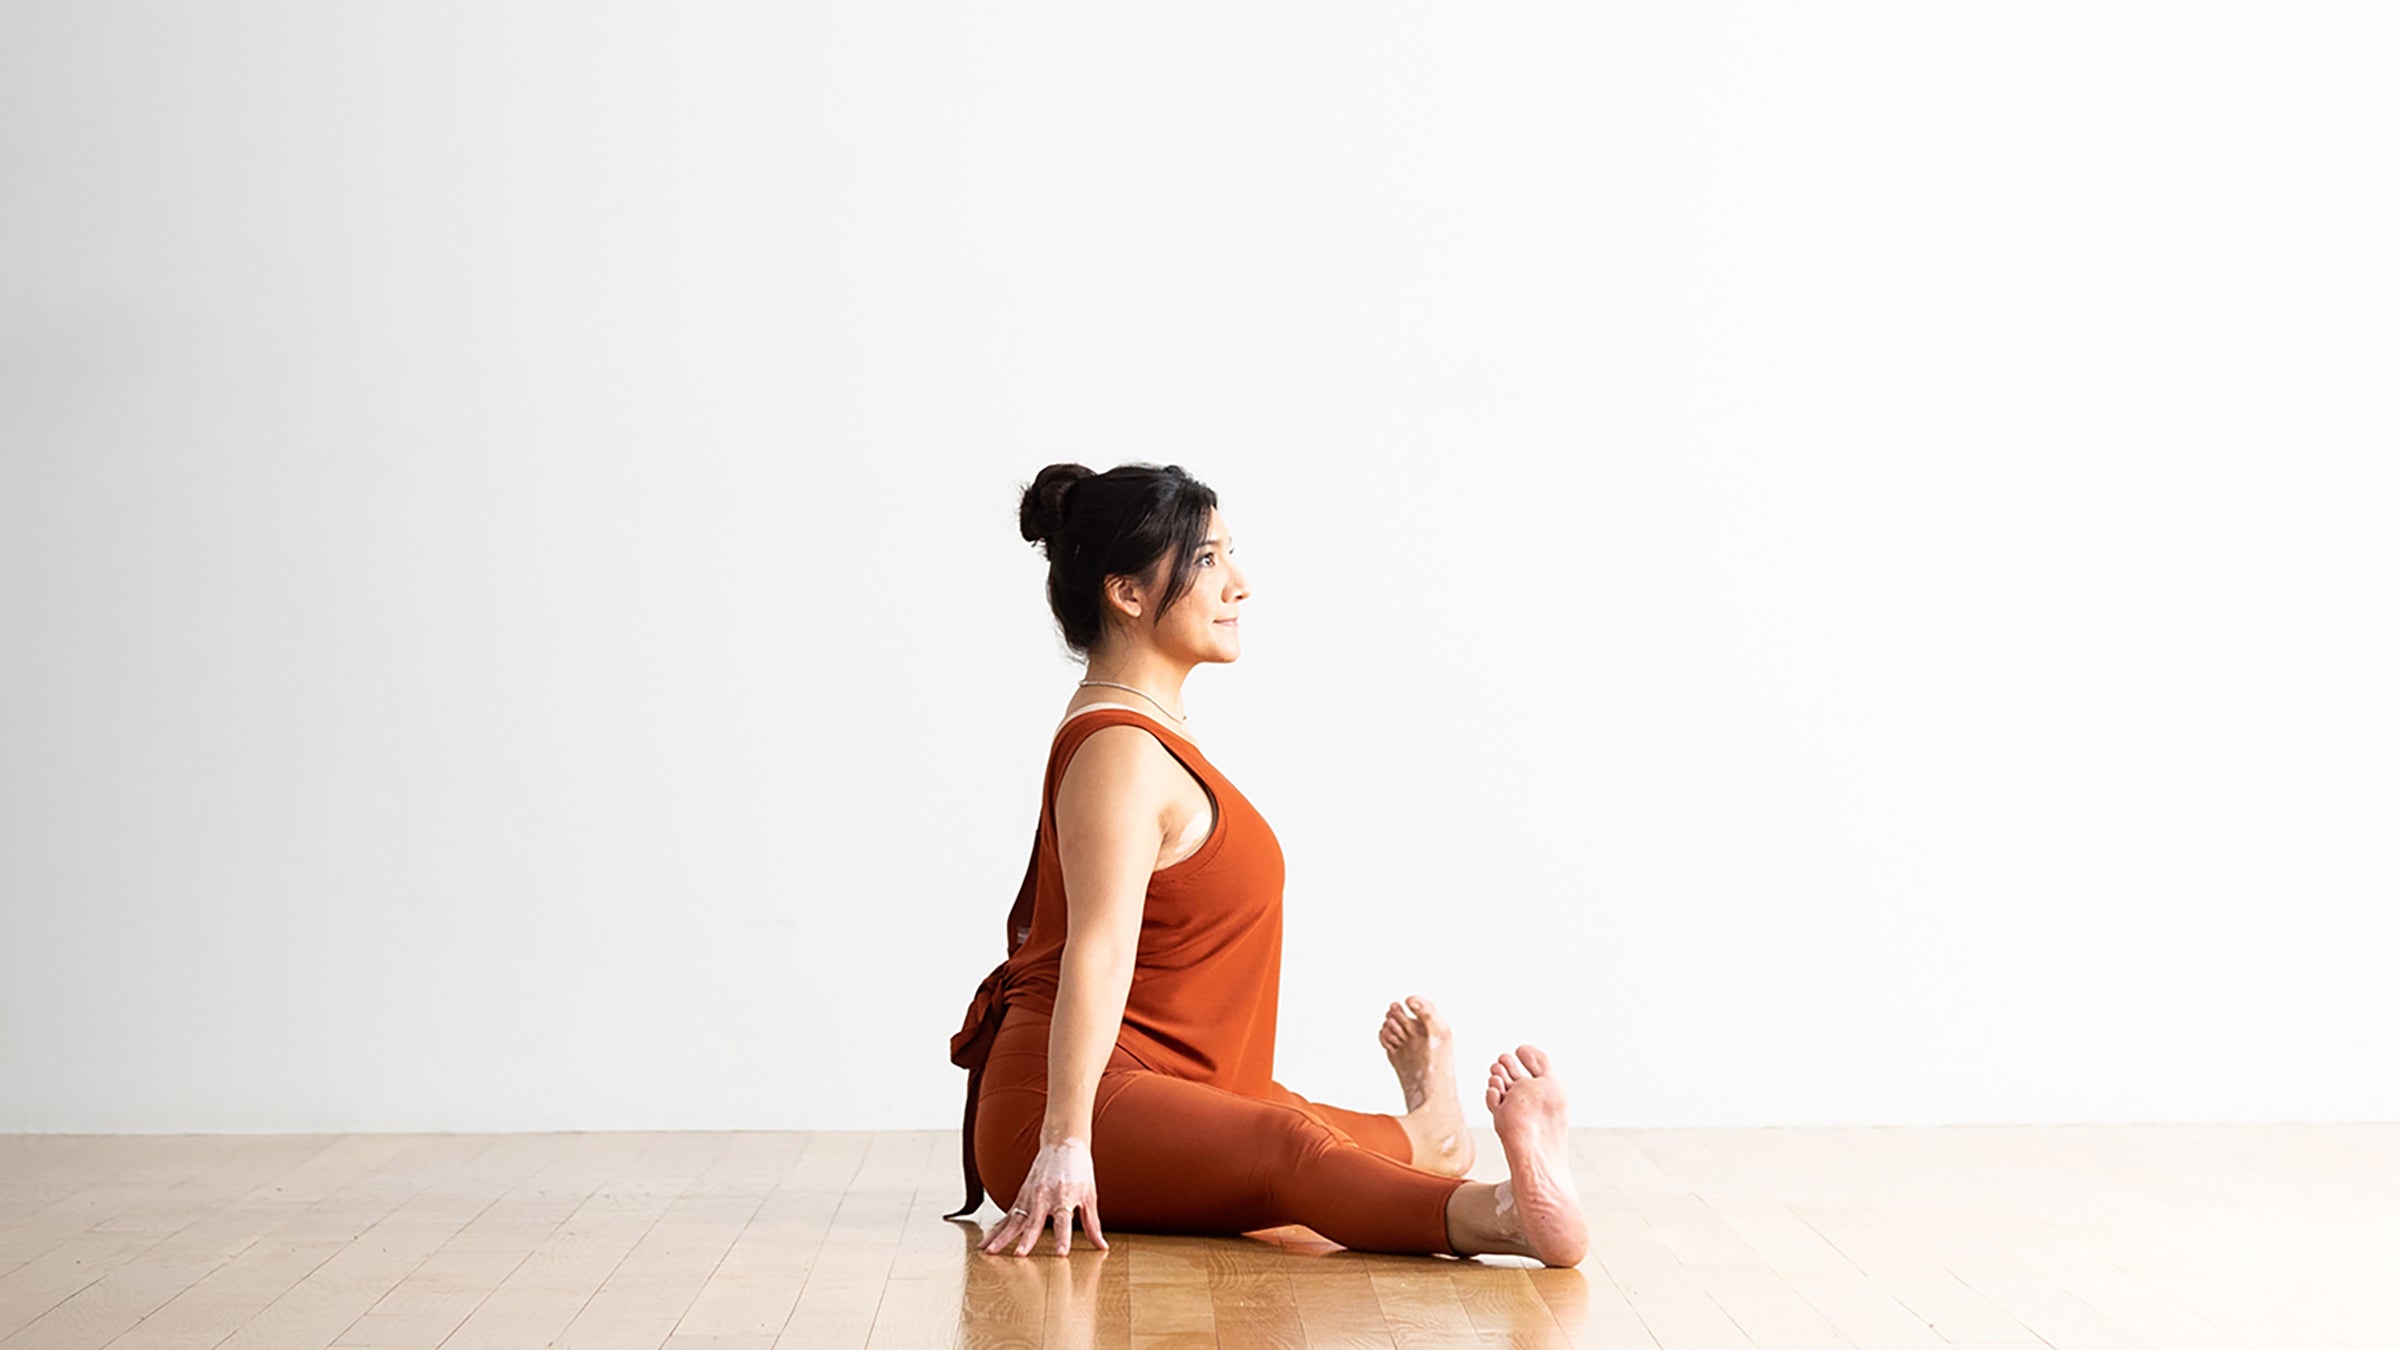 Yoga for Menstruation: 6 Yoga Poses That Help Your Period – OmStars